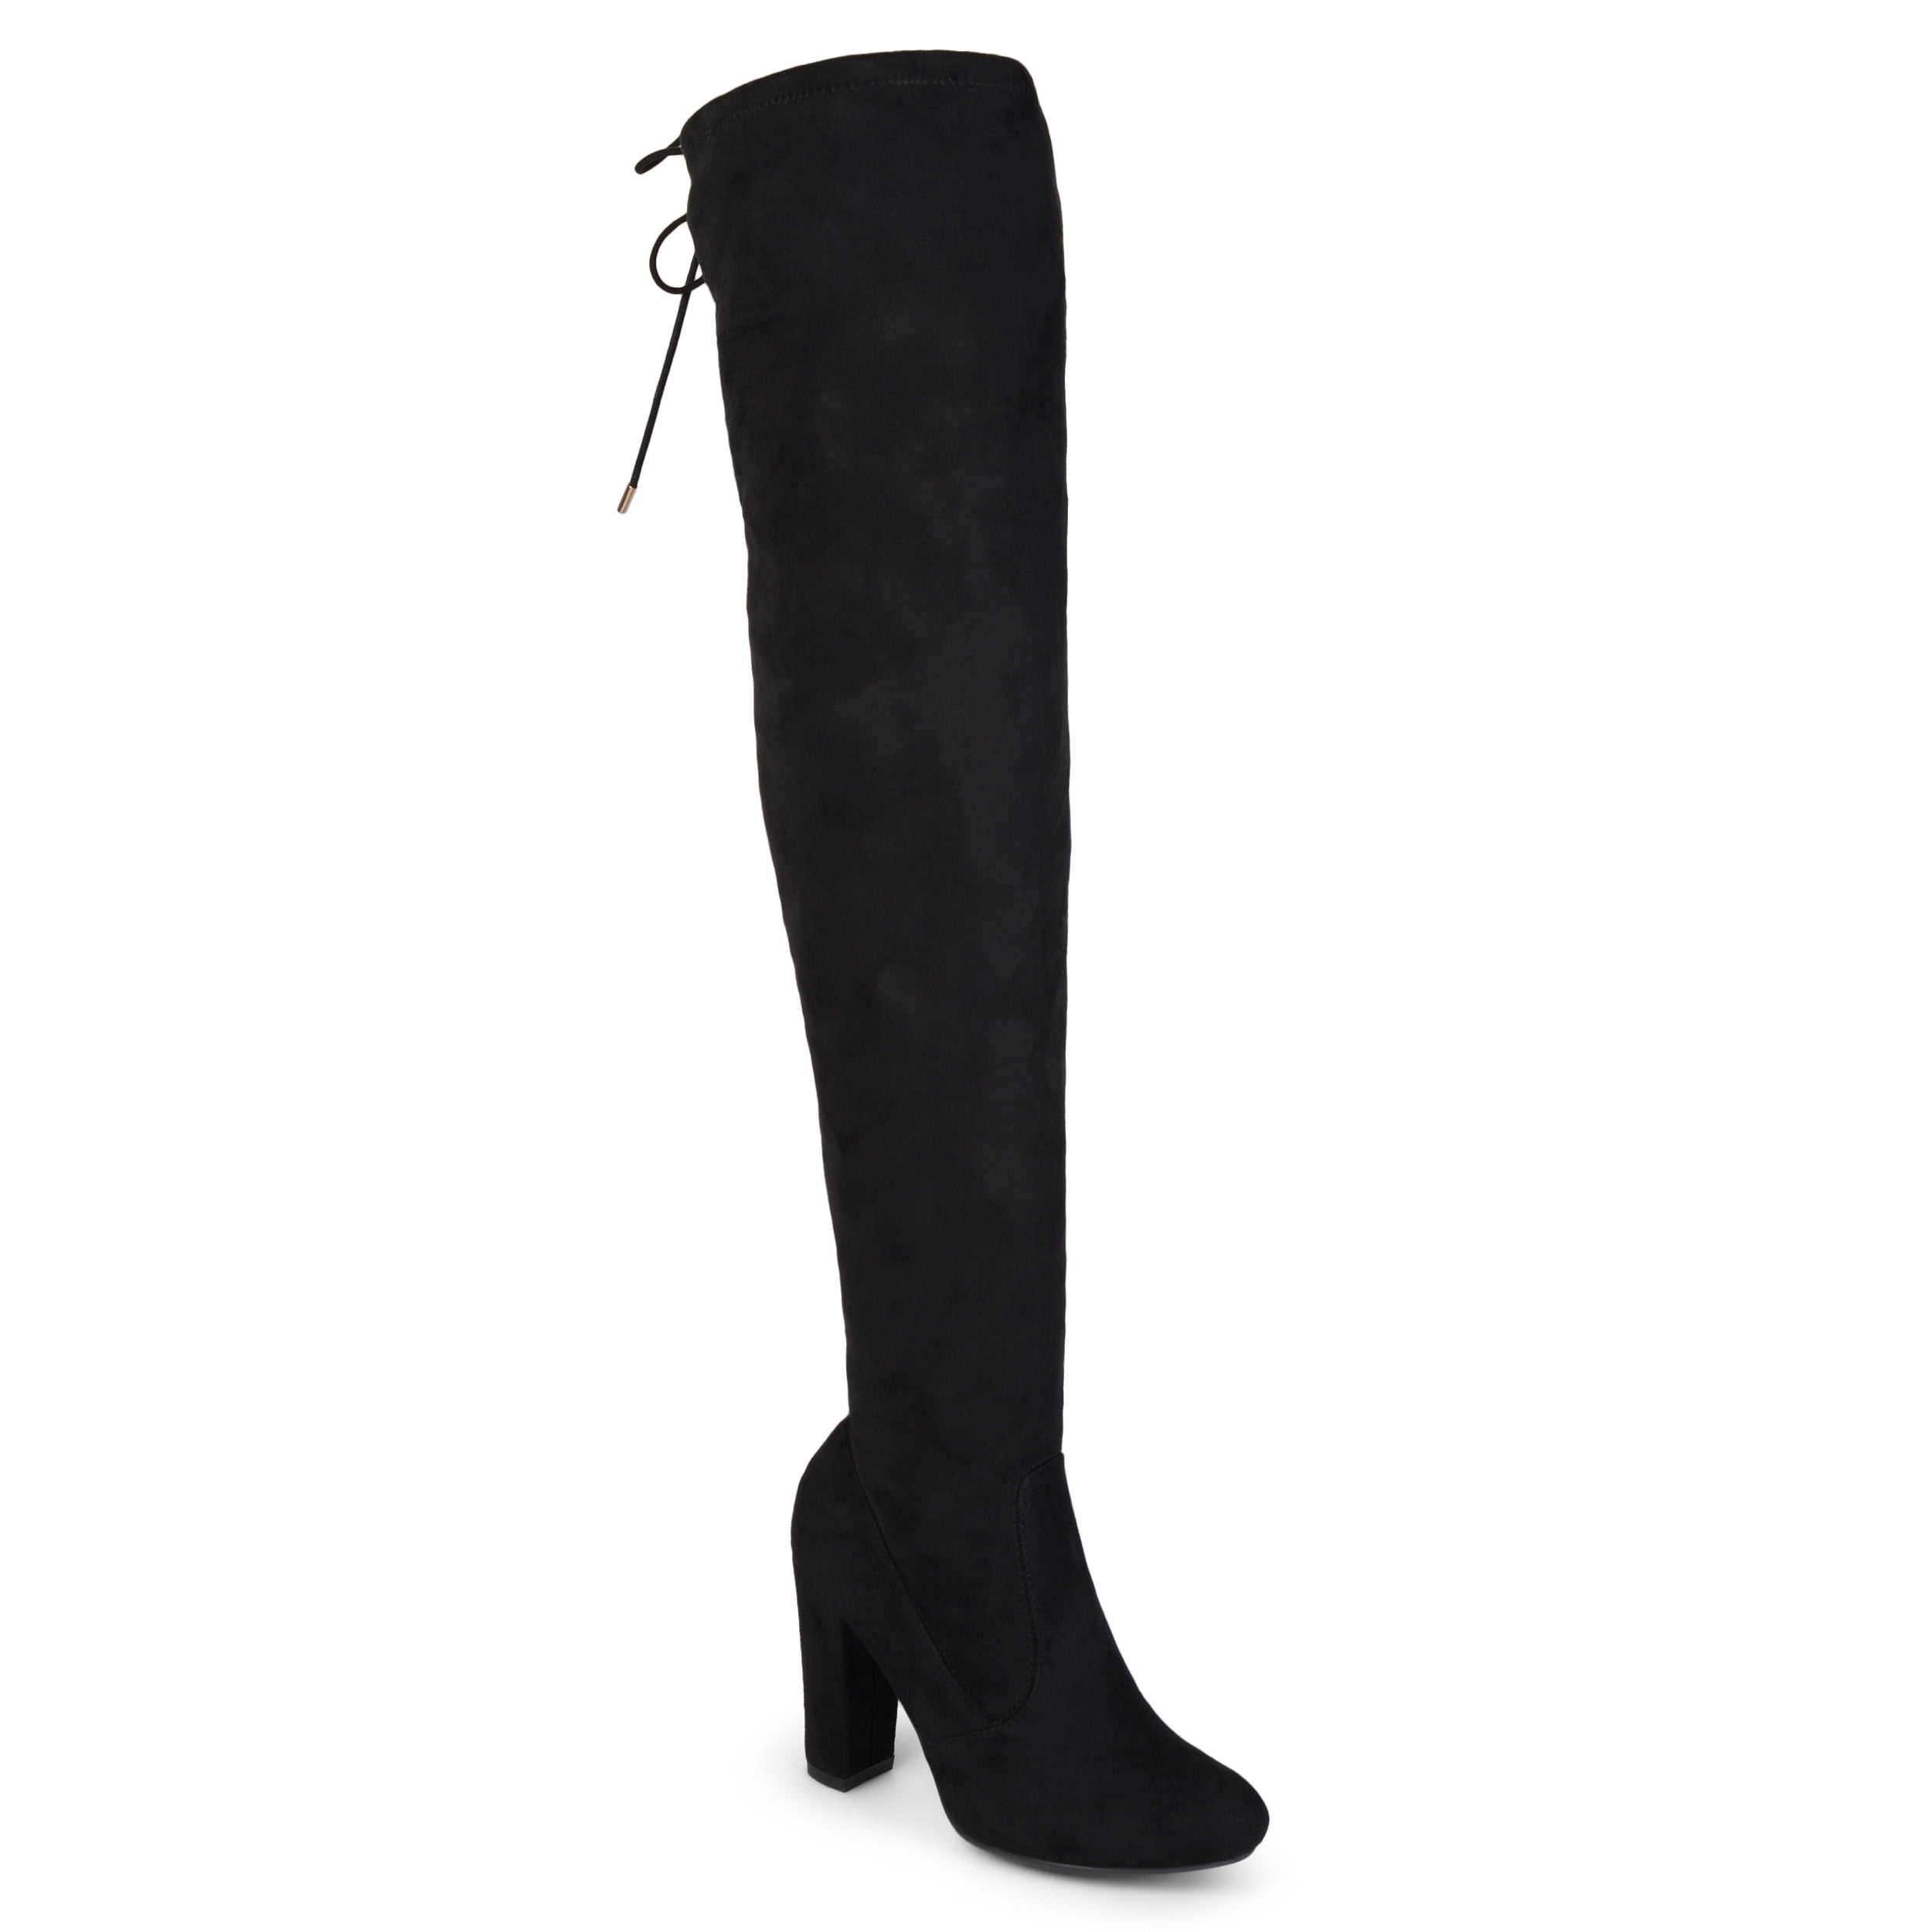 Women's Knee High Riding Boots Chunky Heels Pointy Toe Pull On Shoes Plus Size 